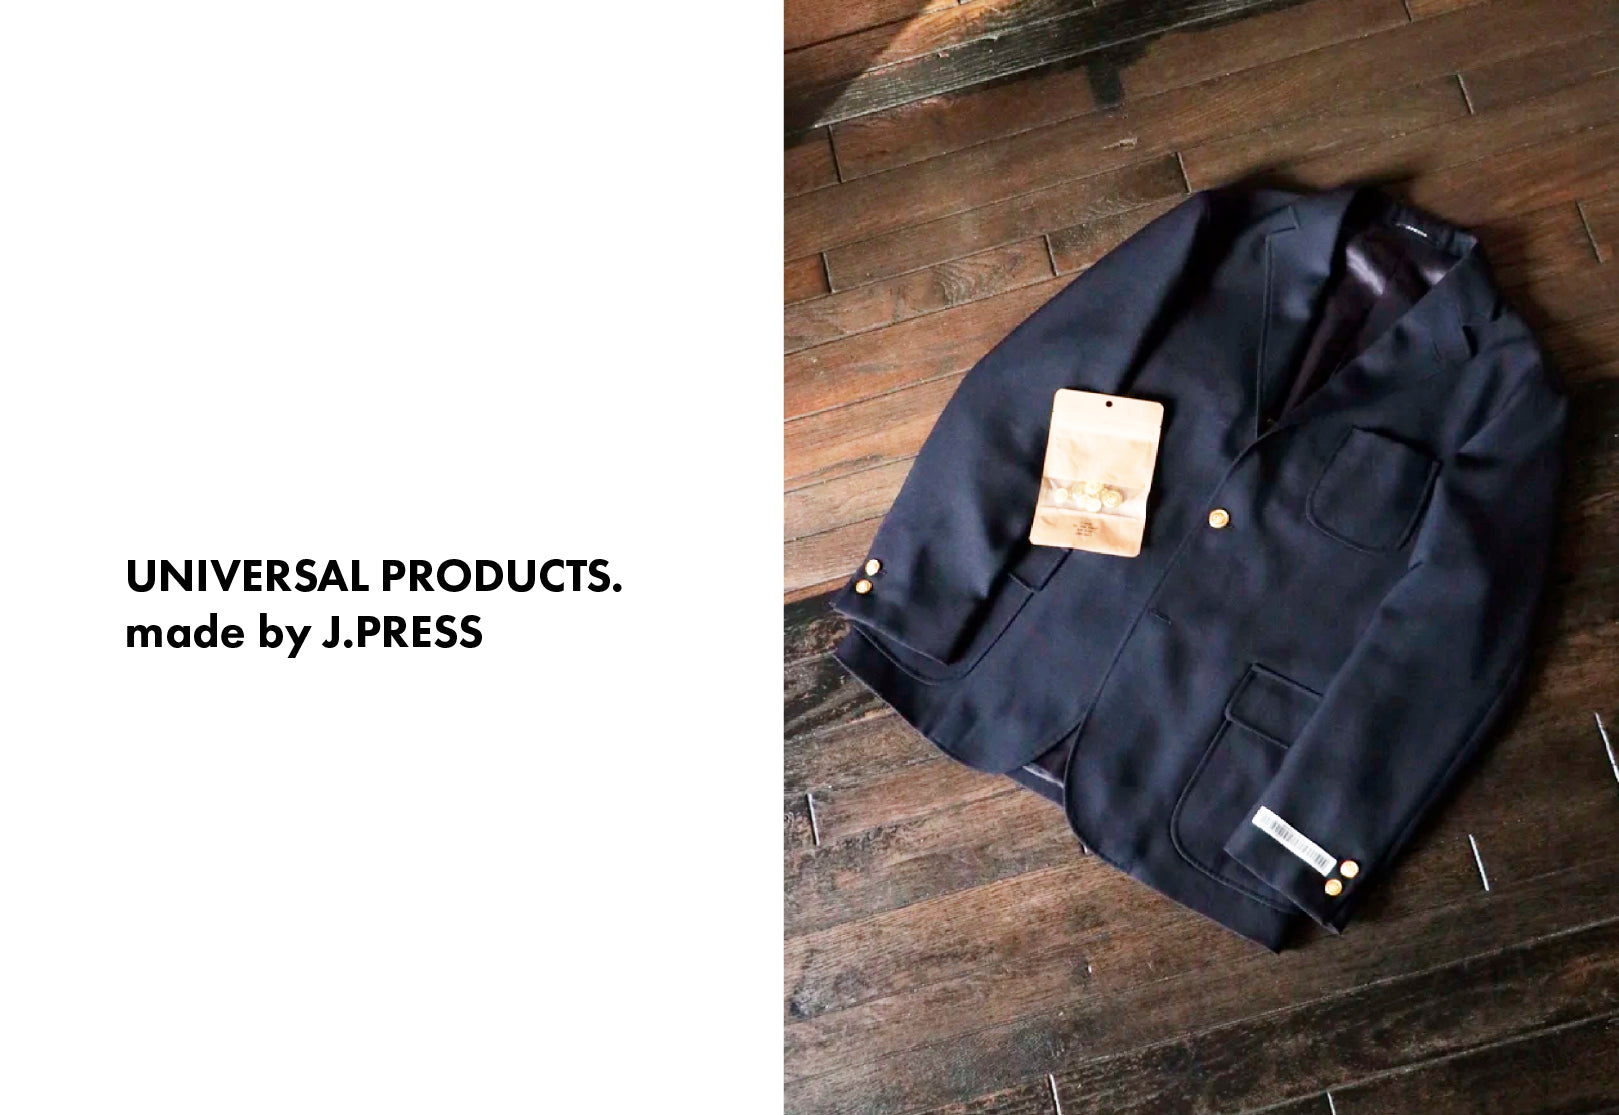 UNIVERSAL PRODUCTS. made by J.PRESS – J.PRESS & SON'S